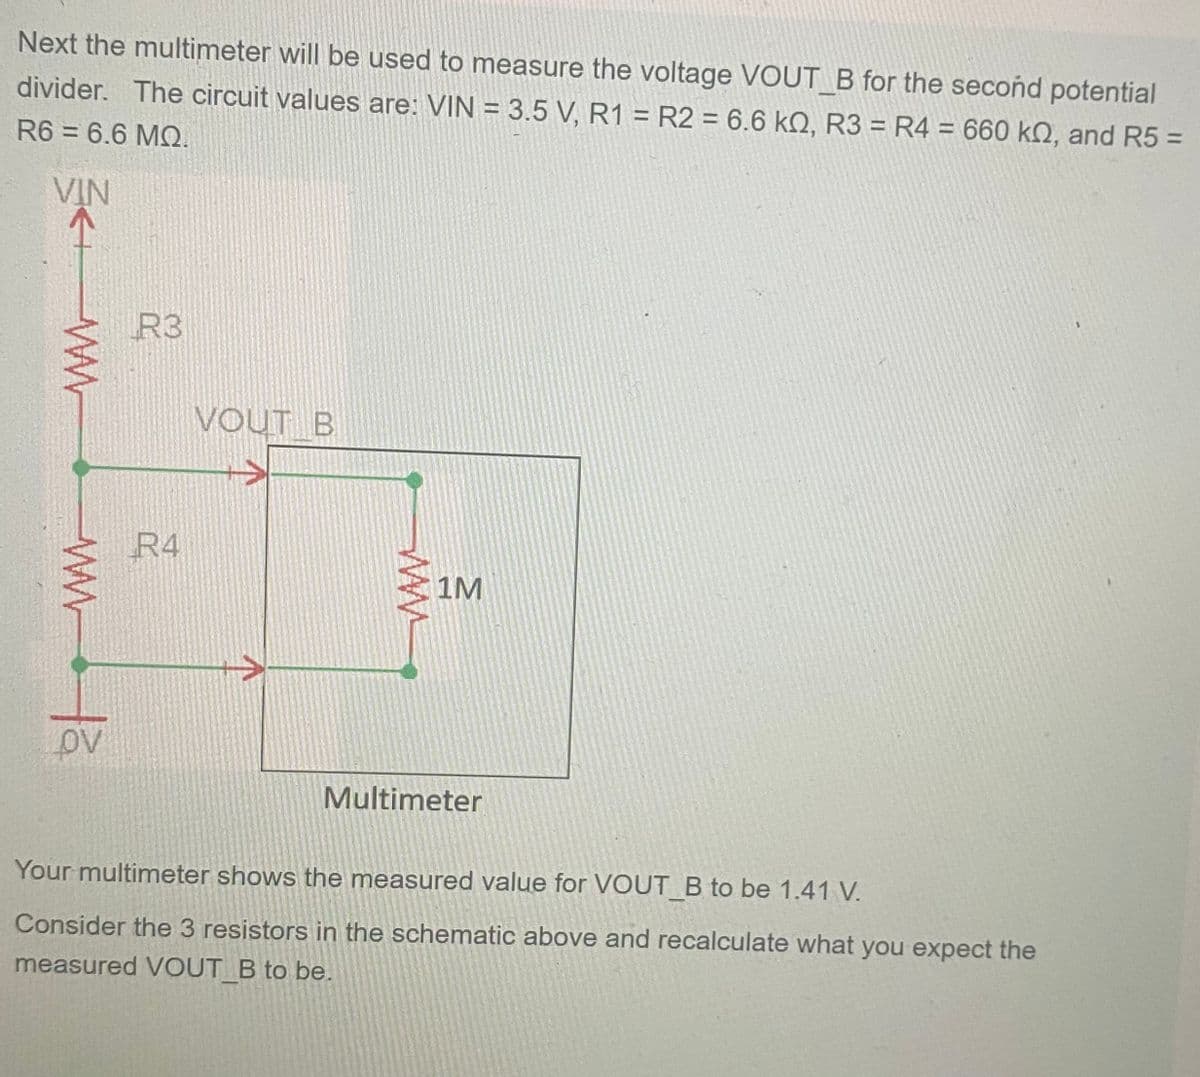 Next the multimeter will be used to measure the voltage VOUT B for the second potential
divider. The circuit values are: VIN = 3.5 V, R1 R2 = 6.6 kQ, R3 = R4 = 660 kn, and R5 =
R6 = 6.6 MQ.
VIN
ww
www.ta
R3
R4
VOUT B
1M
Multimeter
Your multimeter shows the measured value for VOUT_B to be 1.41 V.
Consider the 3 resistors in the schematic above and recalculate what you expect the
measured VOUT B to be.